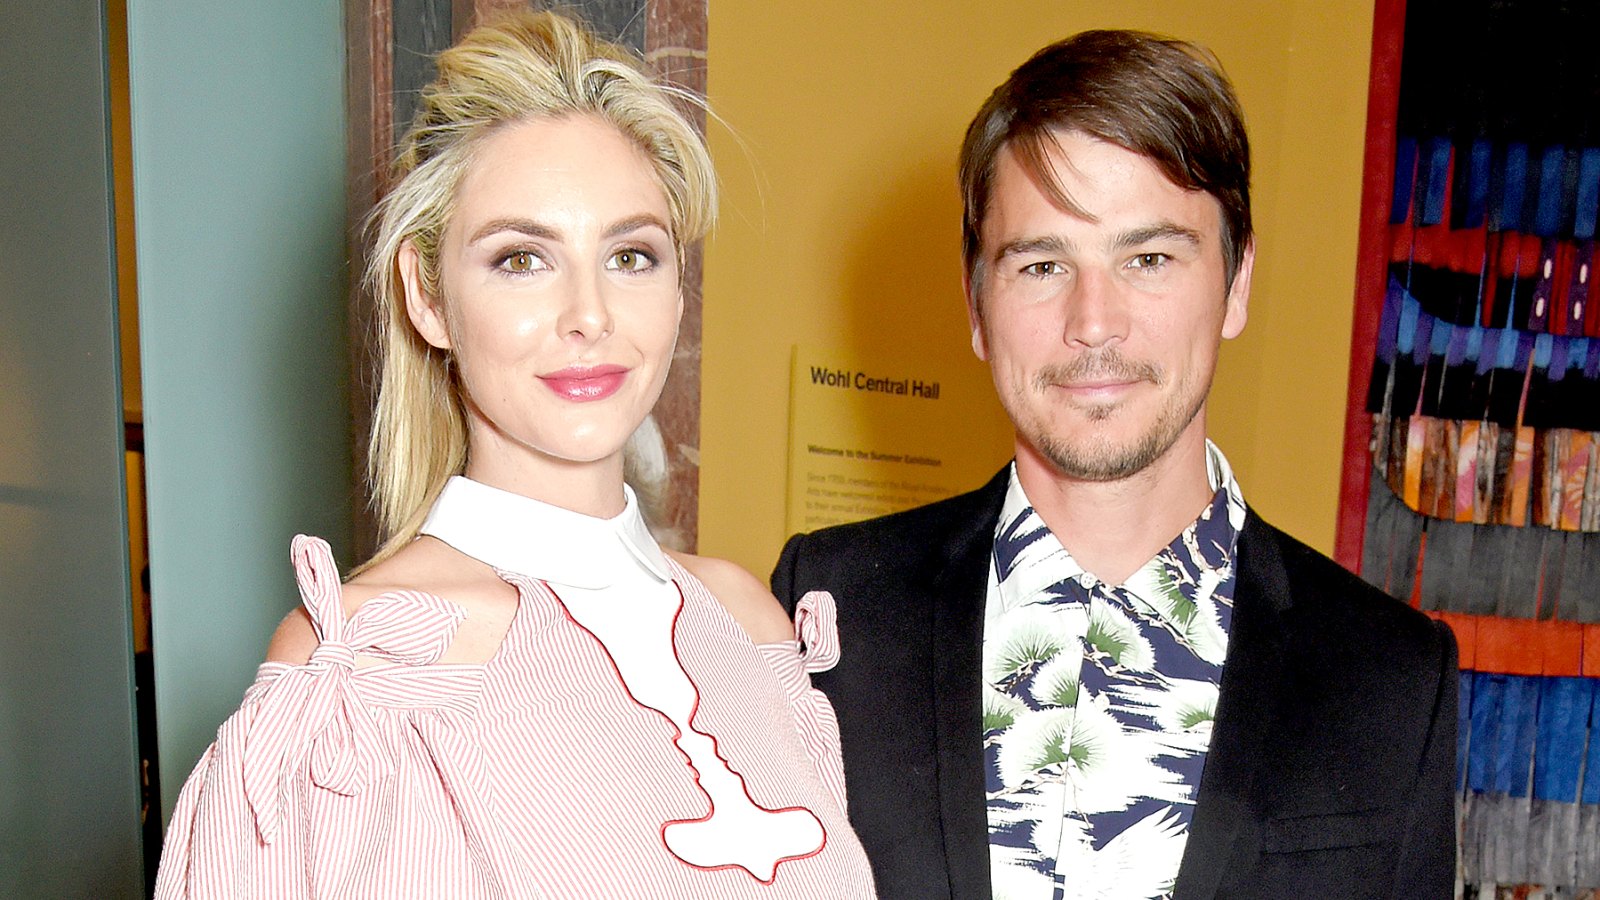 Tamsin Egerton and Josh Hartnett attend the Royal Academy of Arts Summer Exhibition preview party in London on June 7, 2017.